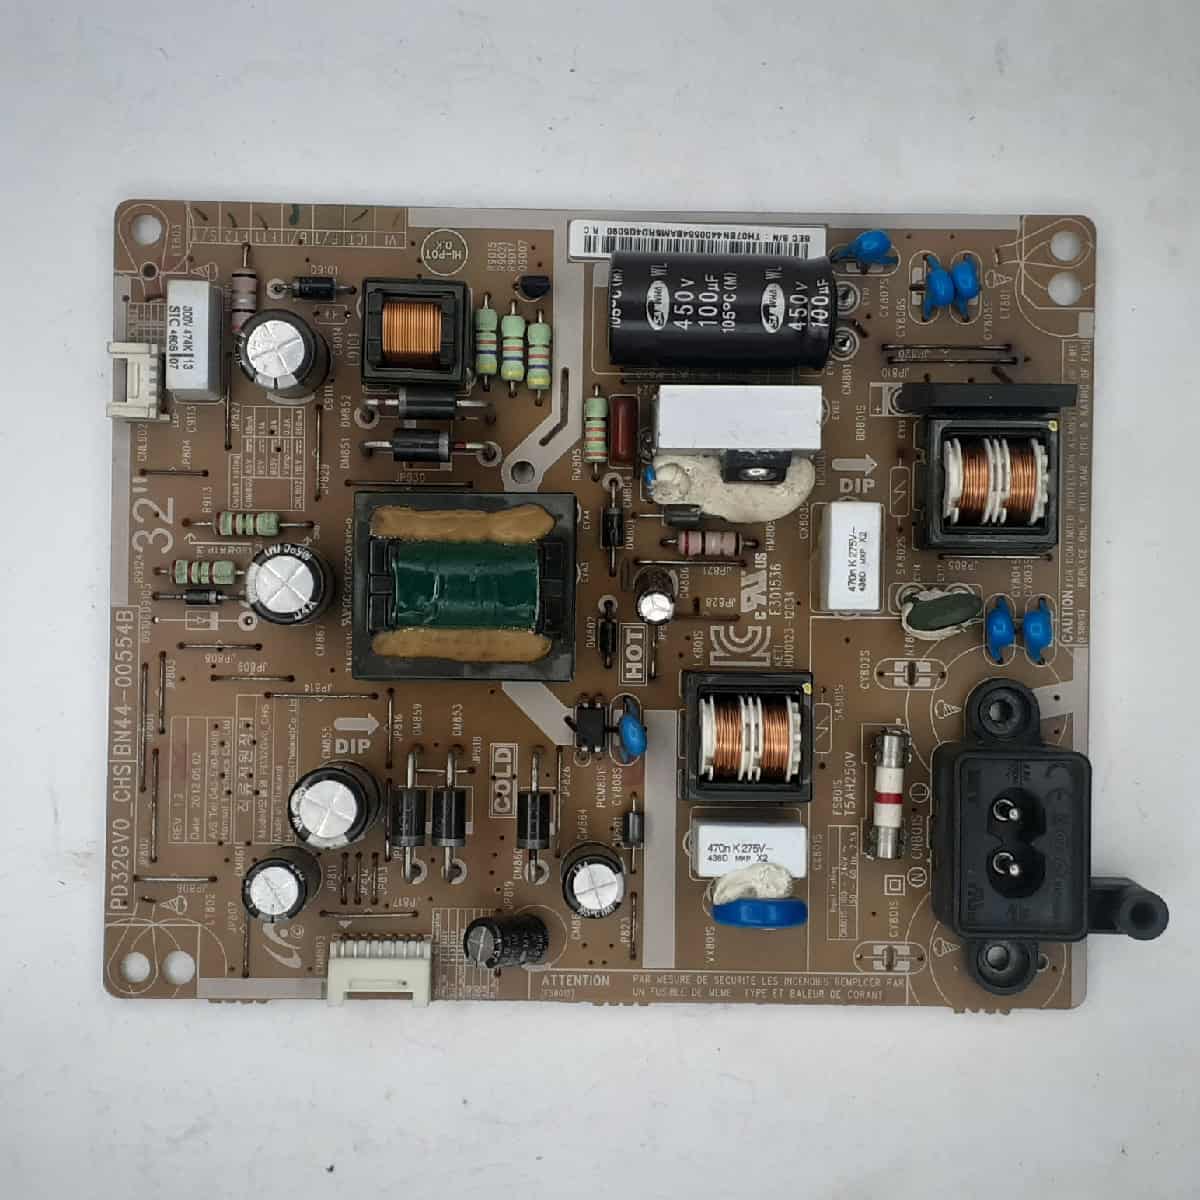 UA32EH4003 SAMSUNG POWER SUPPLY BOARD FOR LED TV